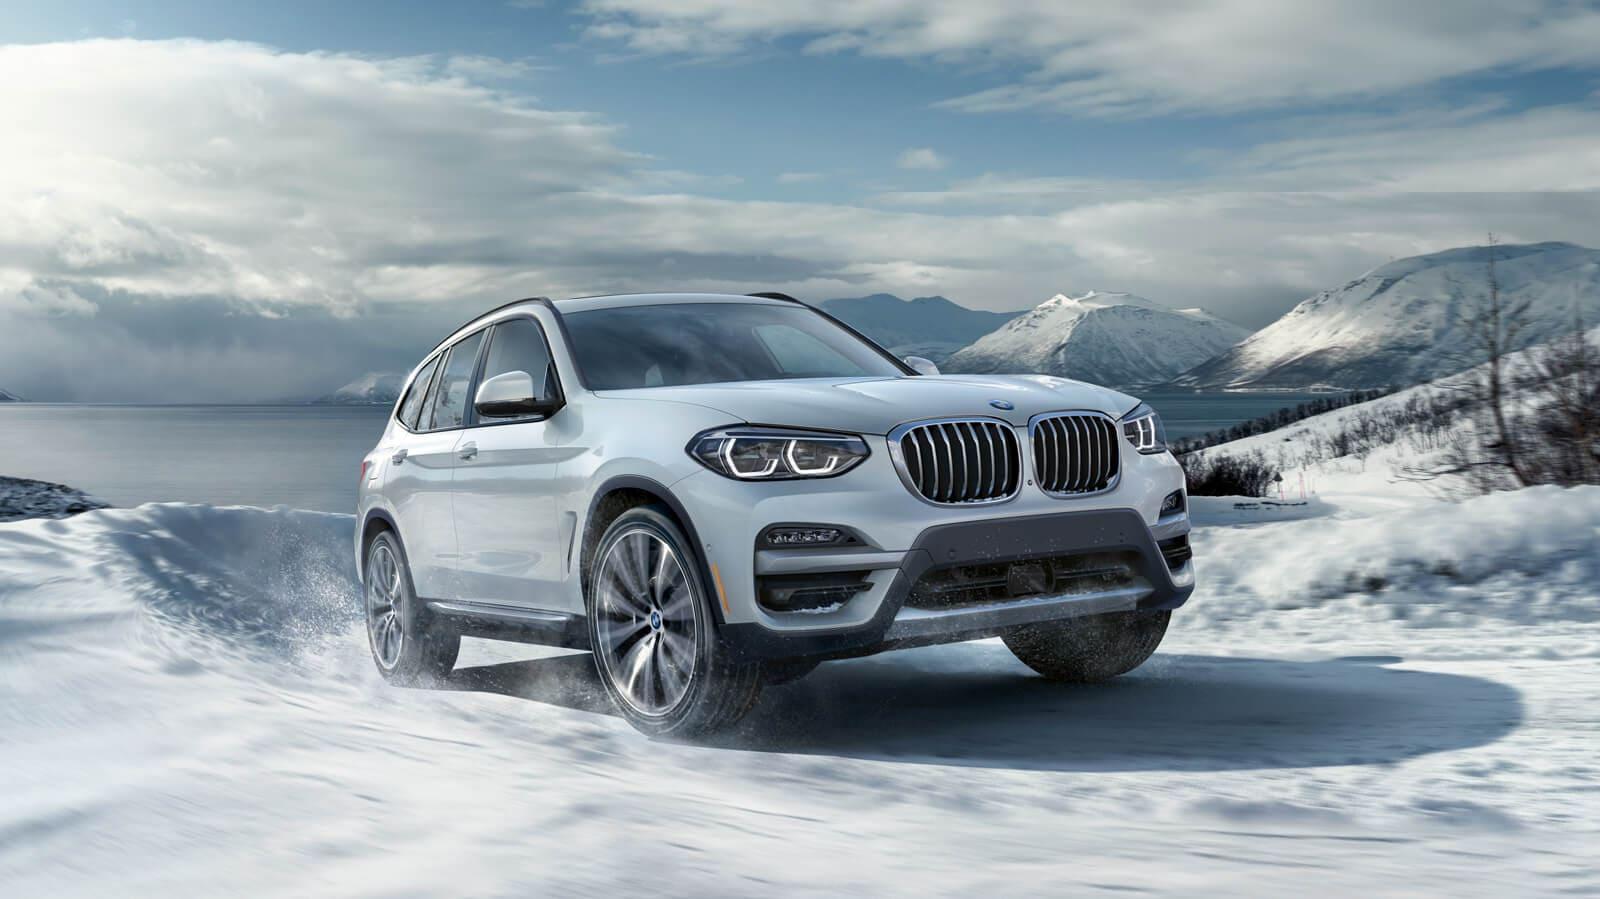 Bmw Accessories For Winter Dealership